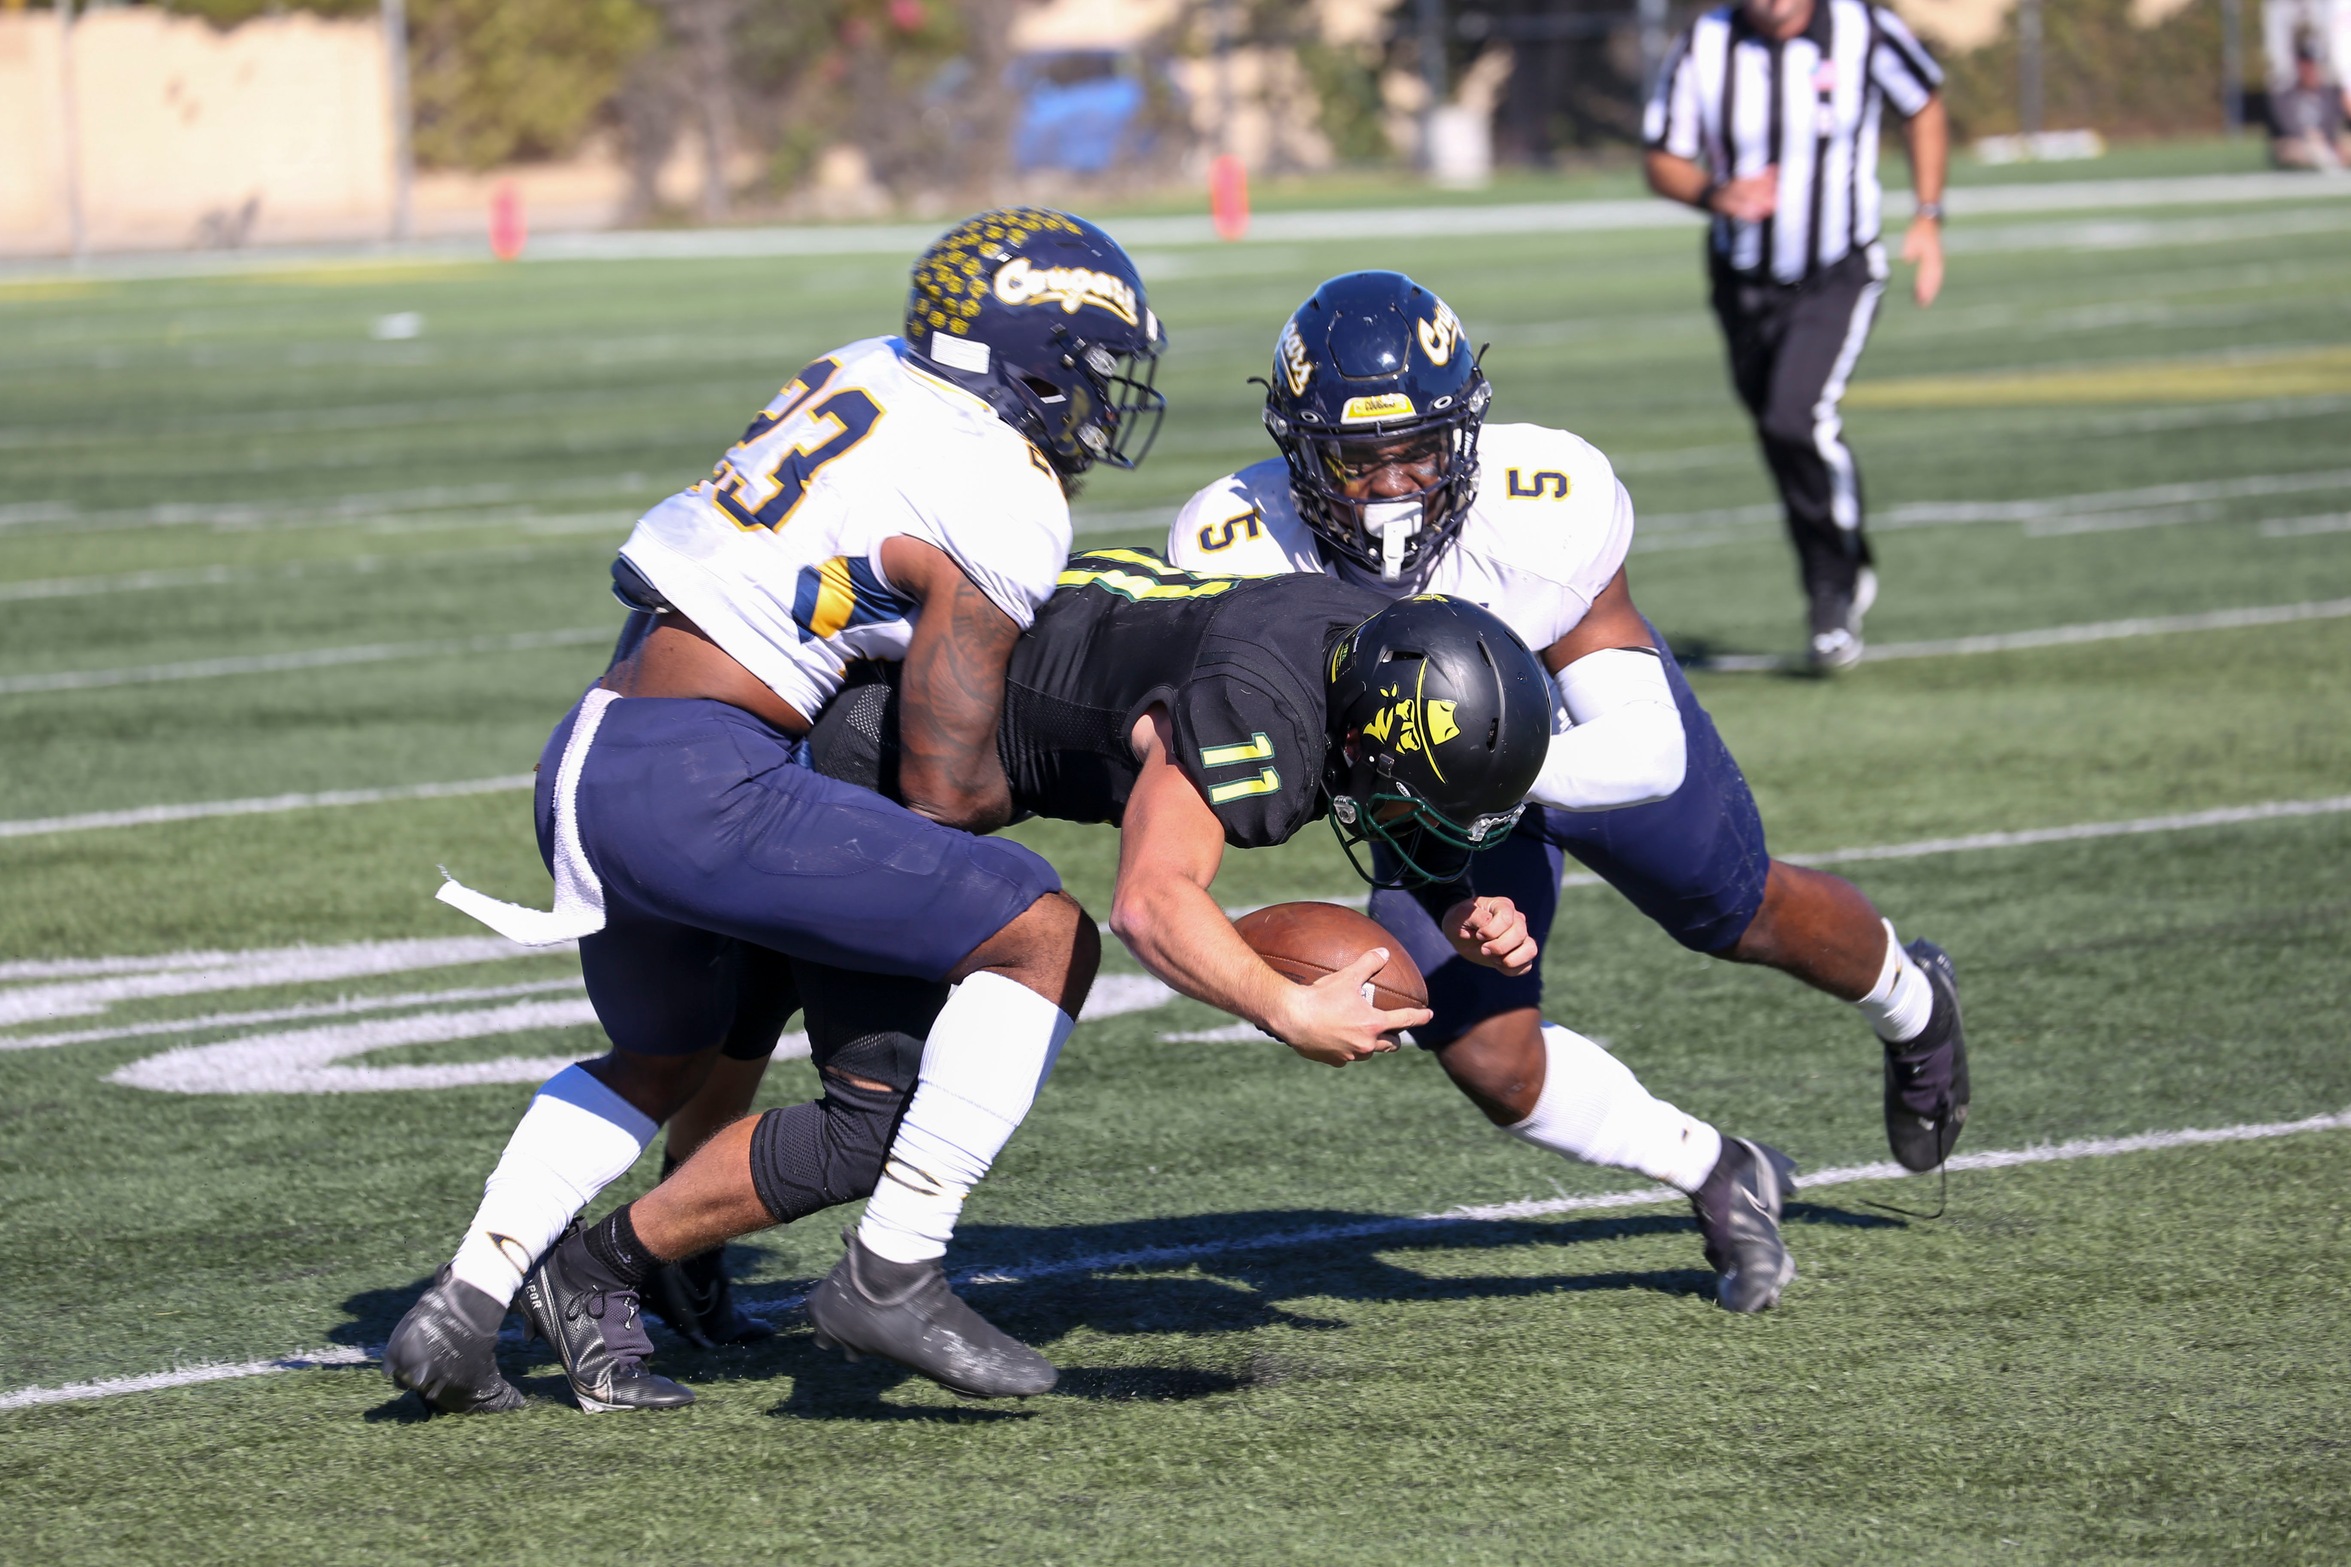 No. 3 seed College of the Canyons suffered a 20-10 postseason defeat at the hands of No. 2 Golden West College on Saturday, despite taking a tie game into the fourth quarter. Canyons has now advanced to the state playoffs in three straight seasons (2018, 2019, 2021) under head coach Ted Iacenda. — Jesse Muñoz/COC Sports Information